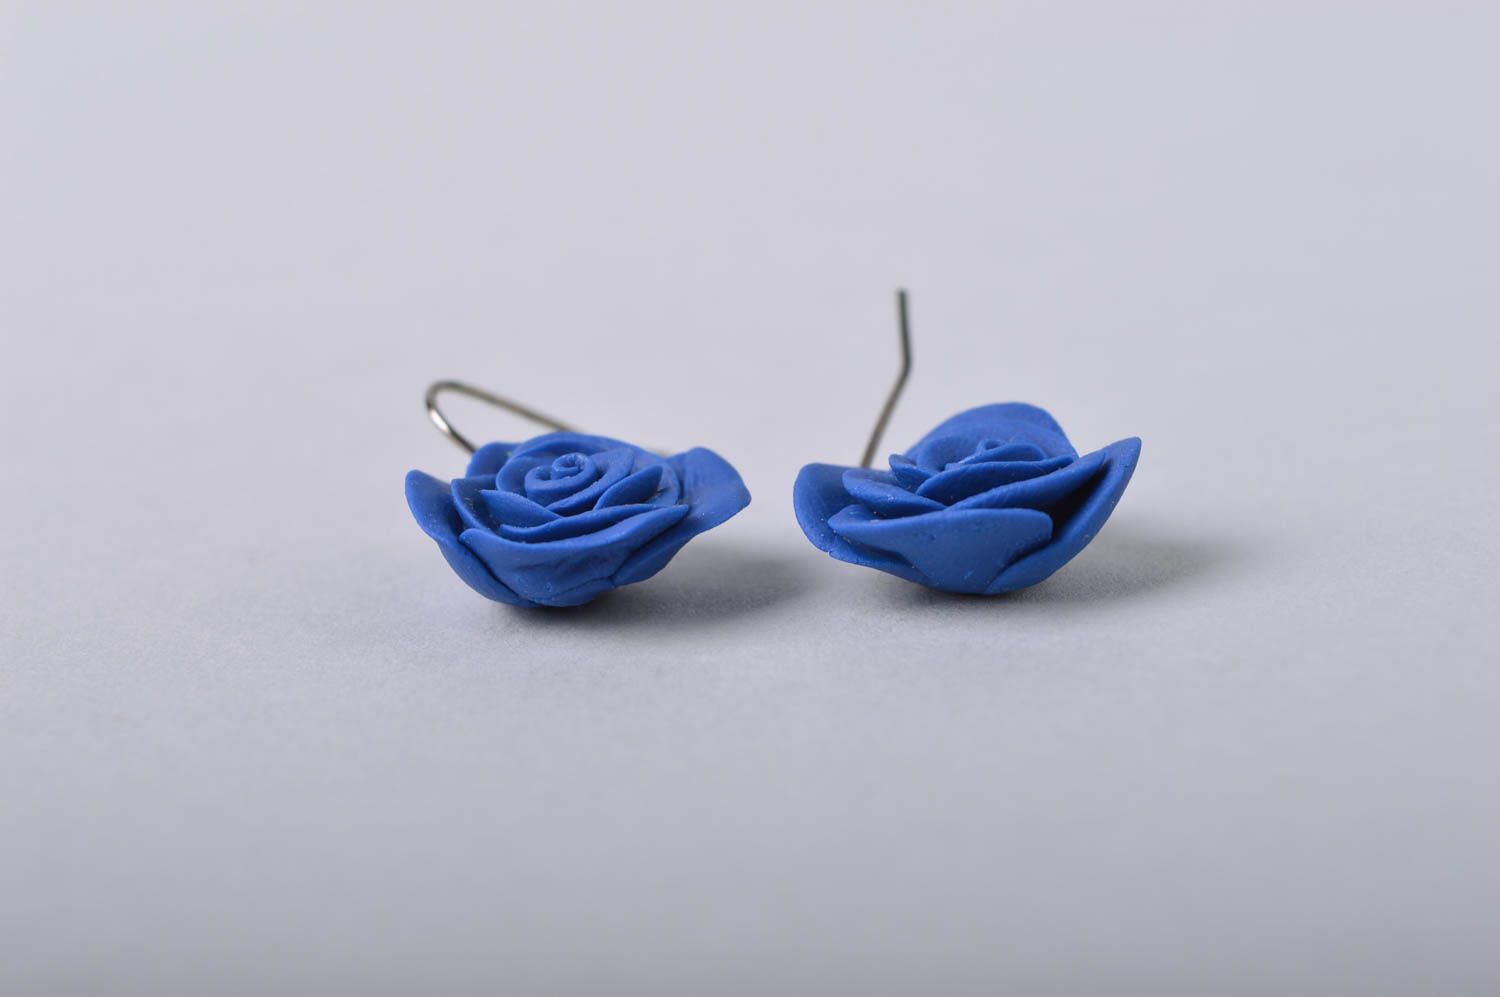 Handmade beautiful moulded earrings made of cold porcelain in shape of roses photo 4